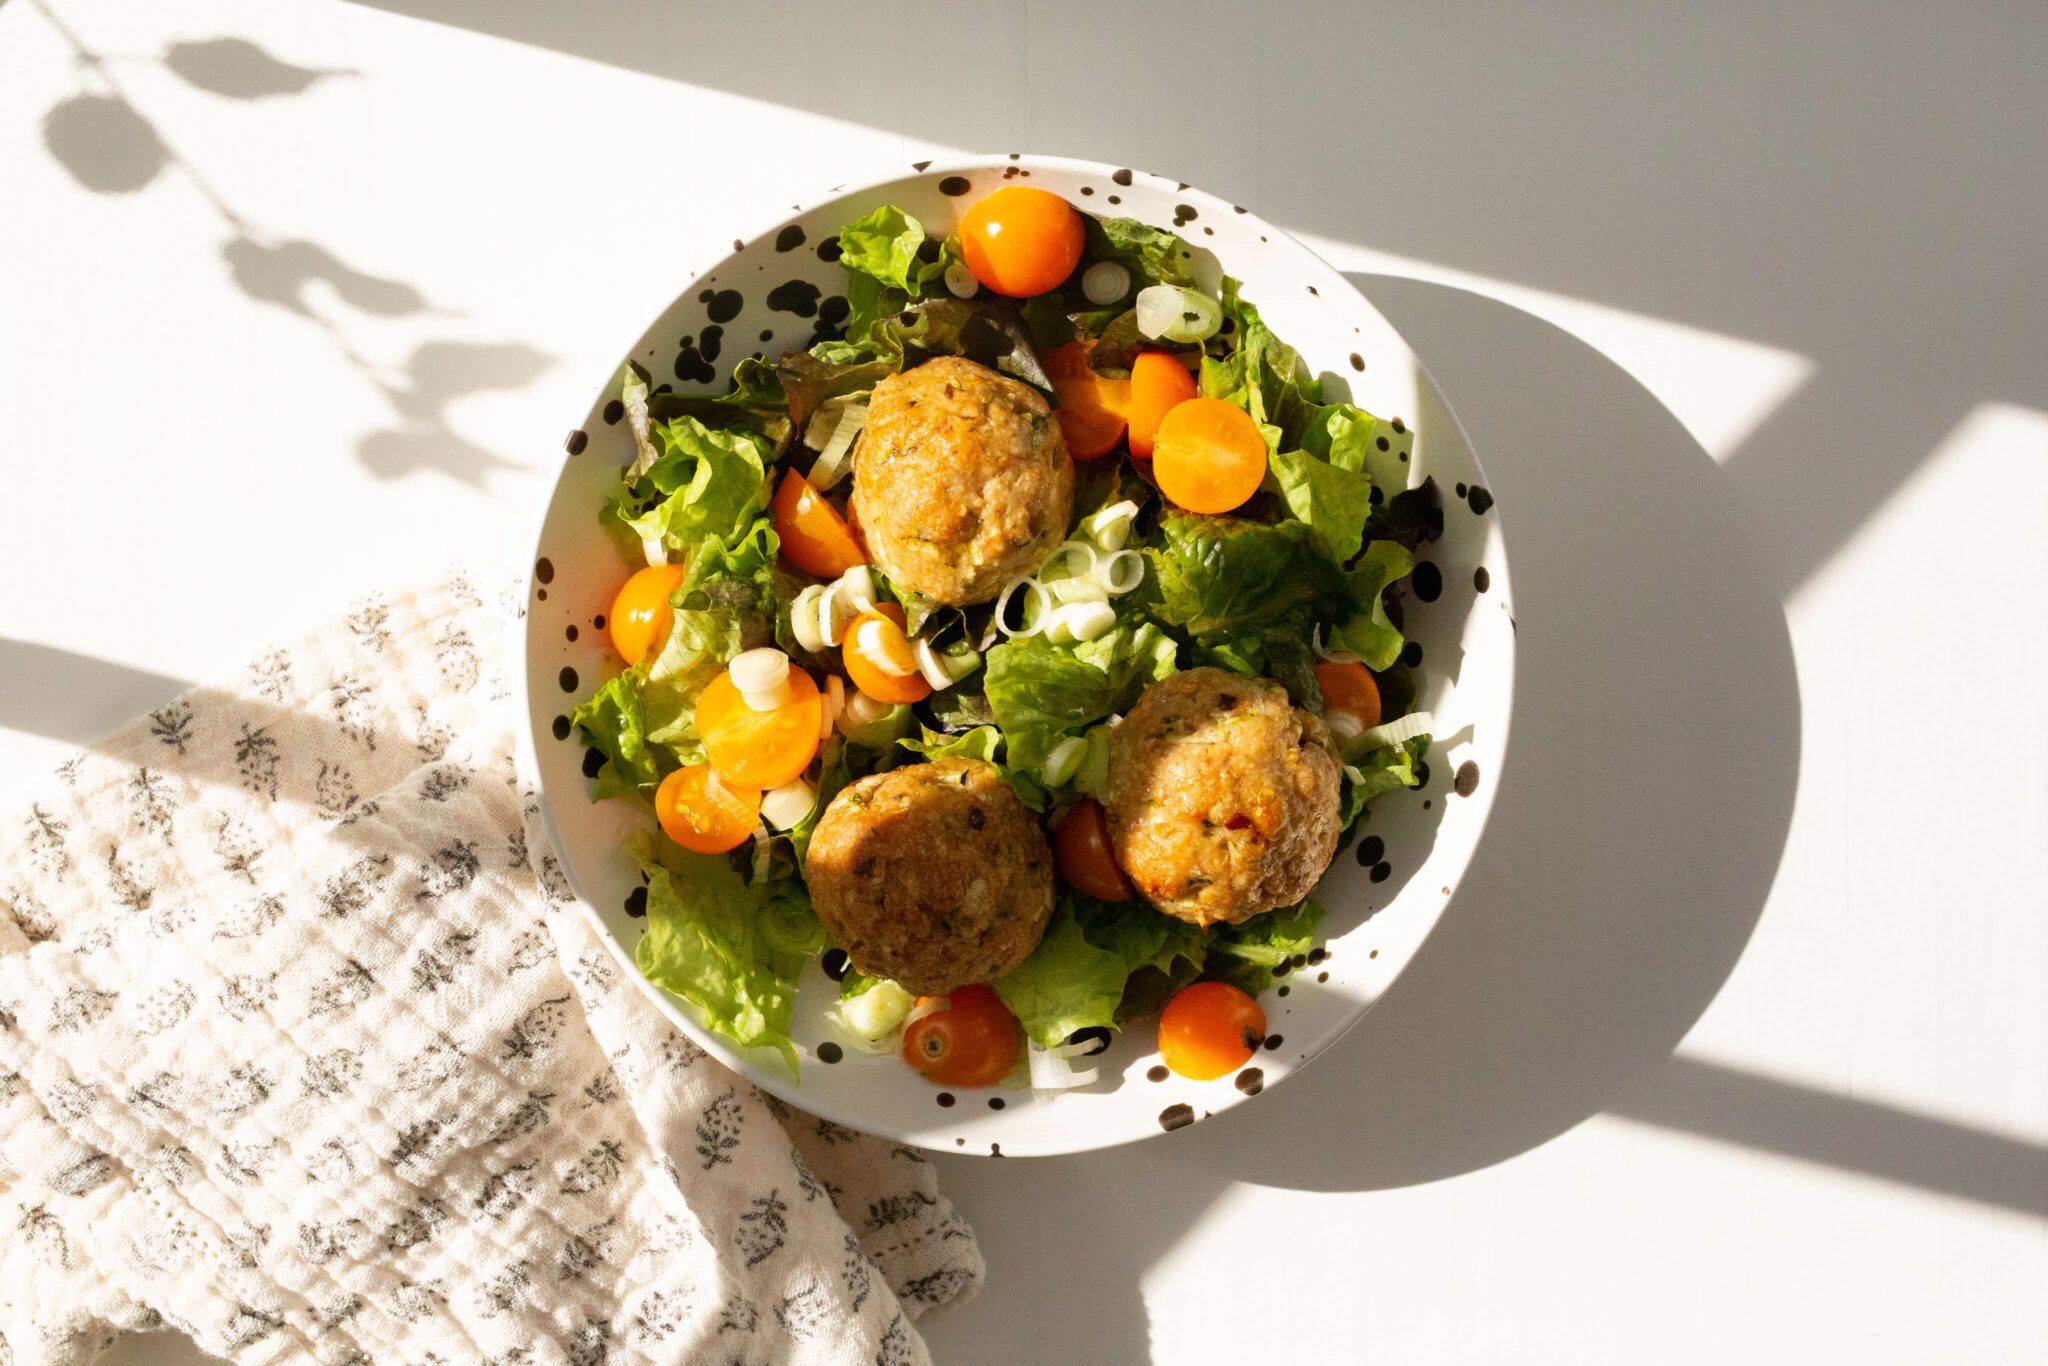 bowl of salad with turkey meatballs on white table with white printed napkin